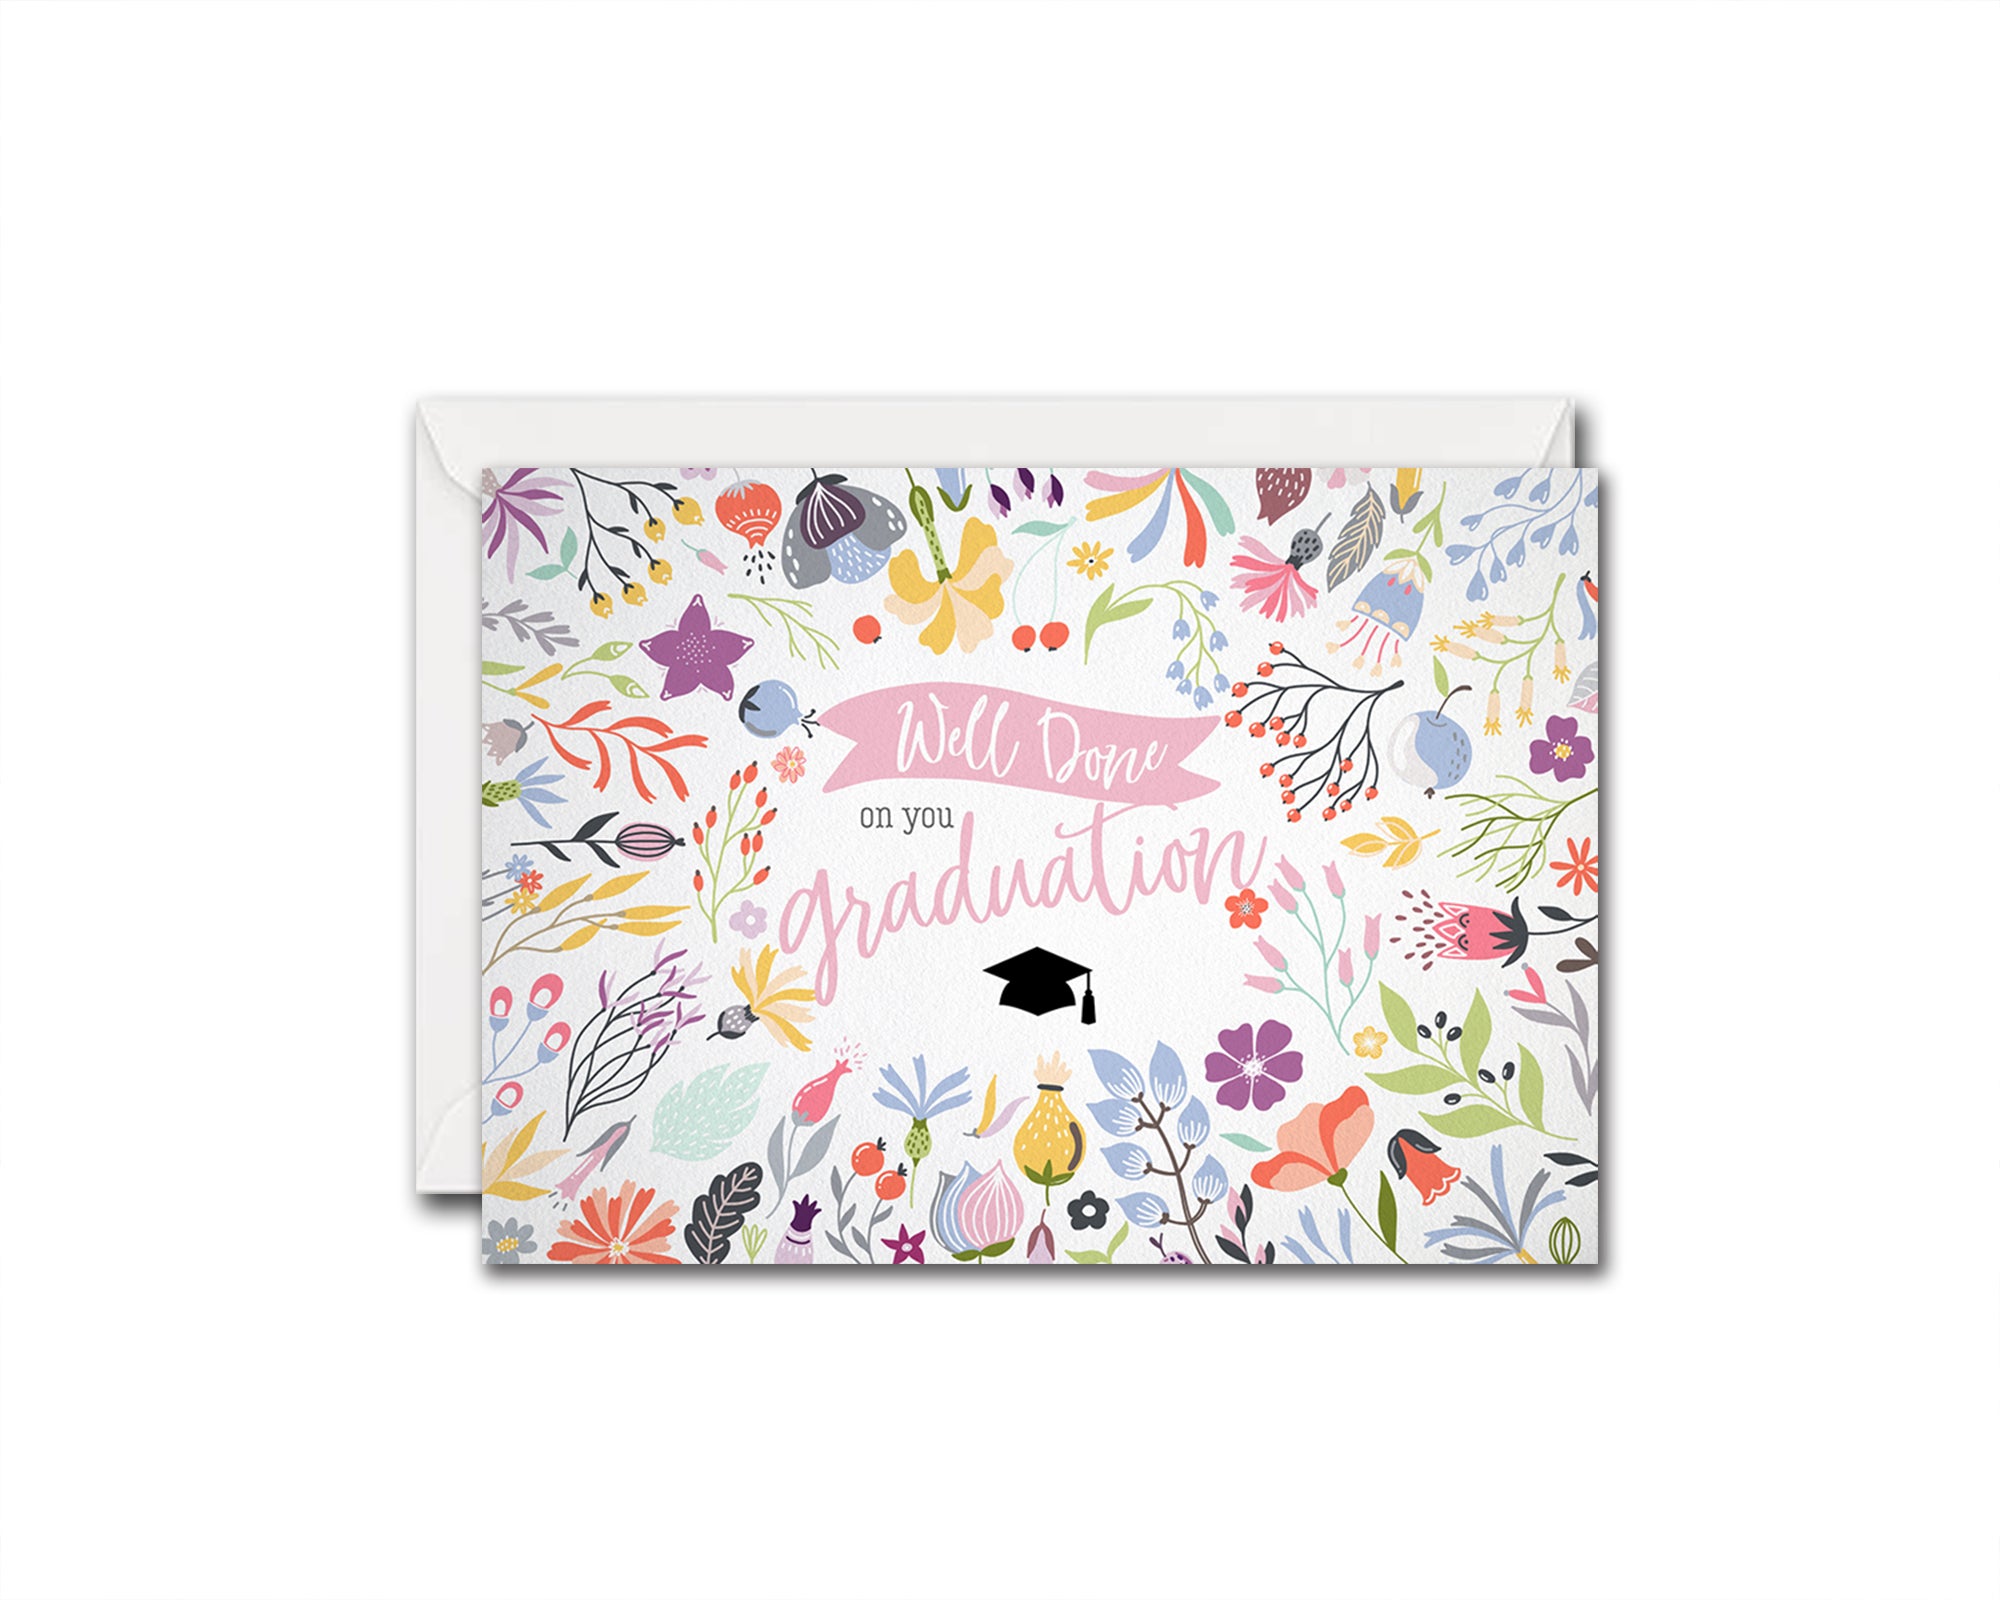 Well done on our graduation Achievement Award Gift Customizable Card